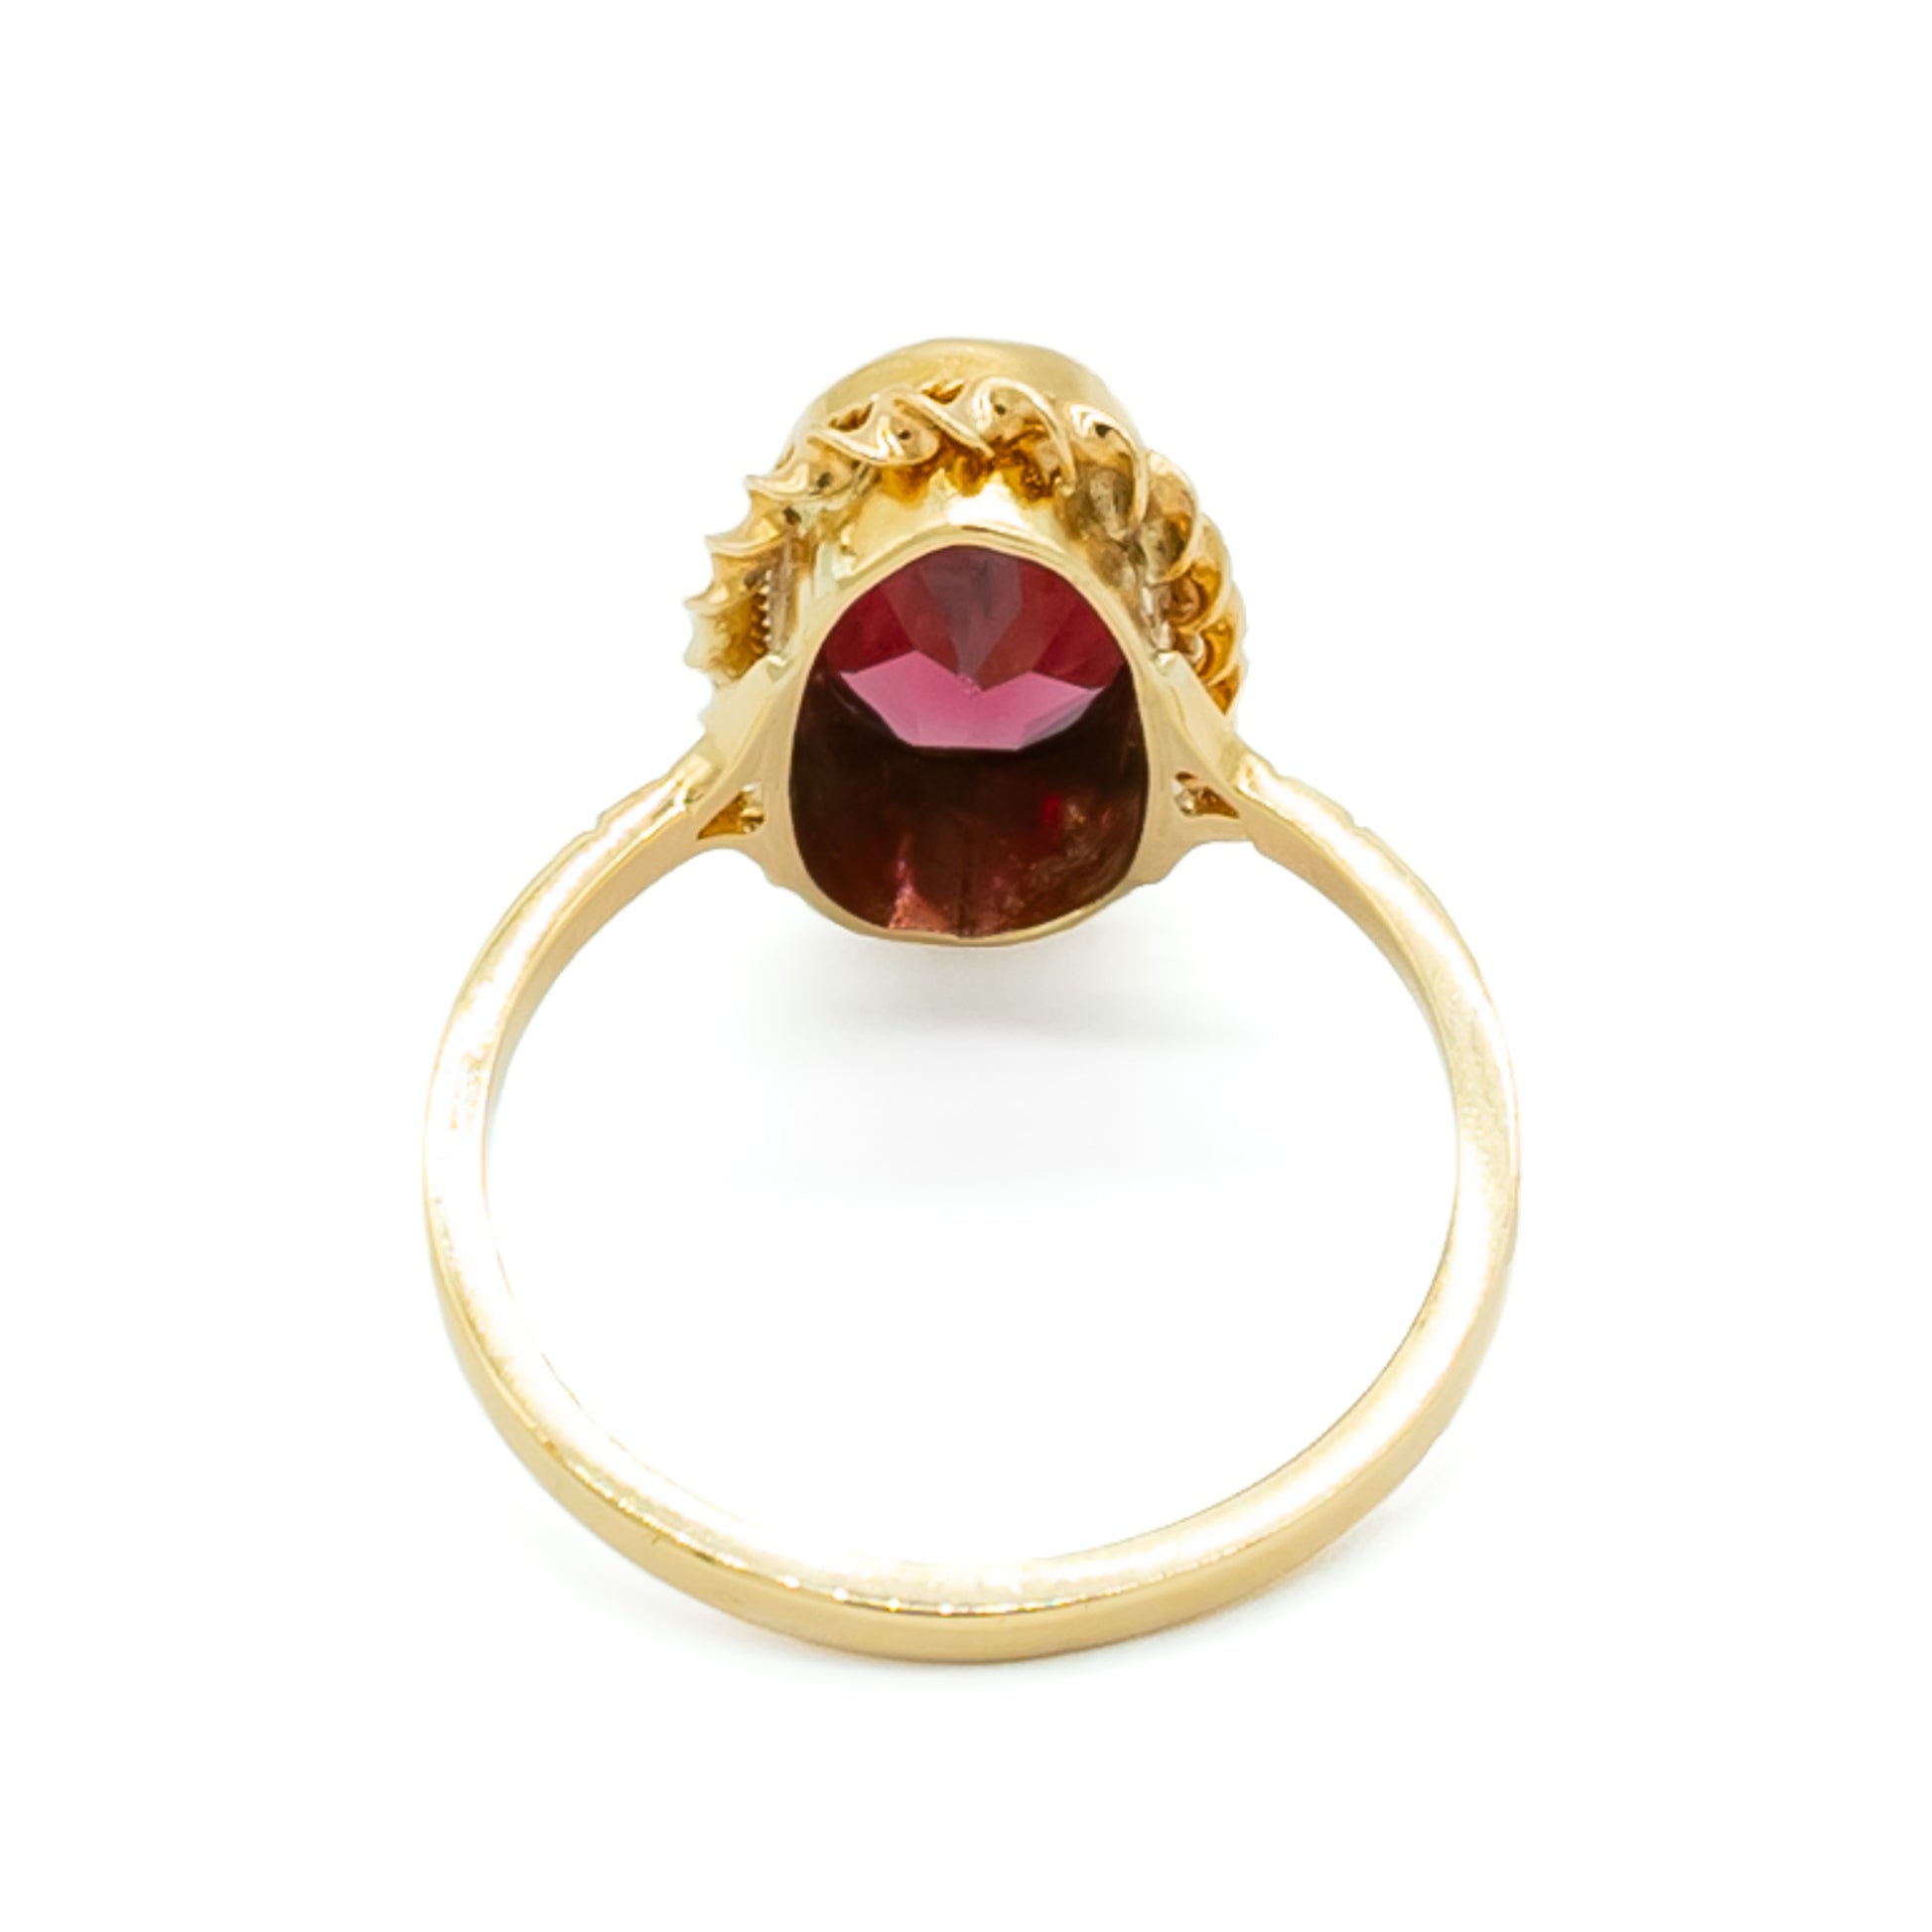 Classic 9ct yellow gold ring with beautifully faceted almandine garnet.  Circa 1940’s